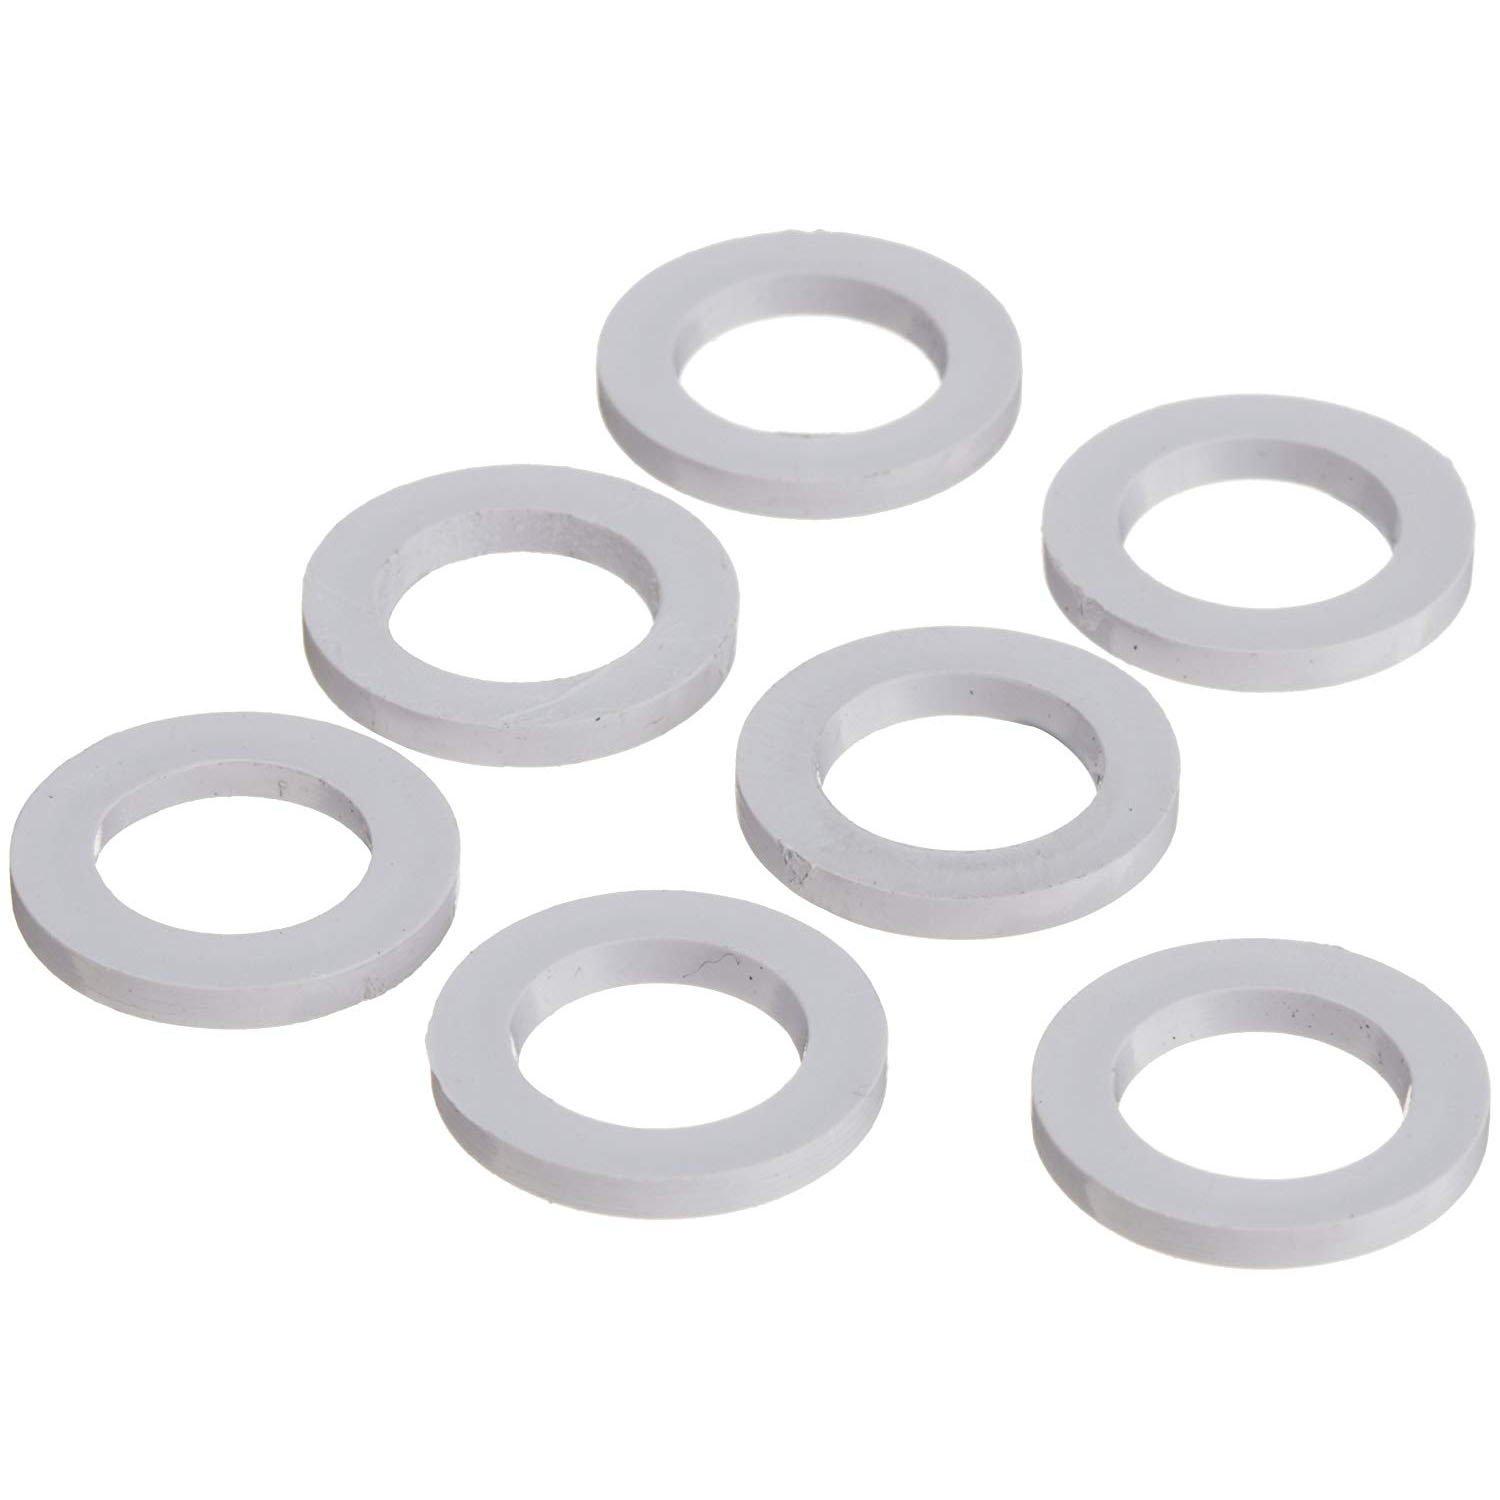 Pentair  Washer 5/8in OD 3/8in ID 1/16in  Plastic (Set of 8)